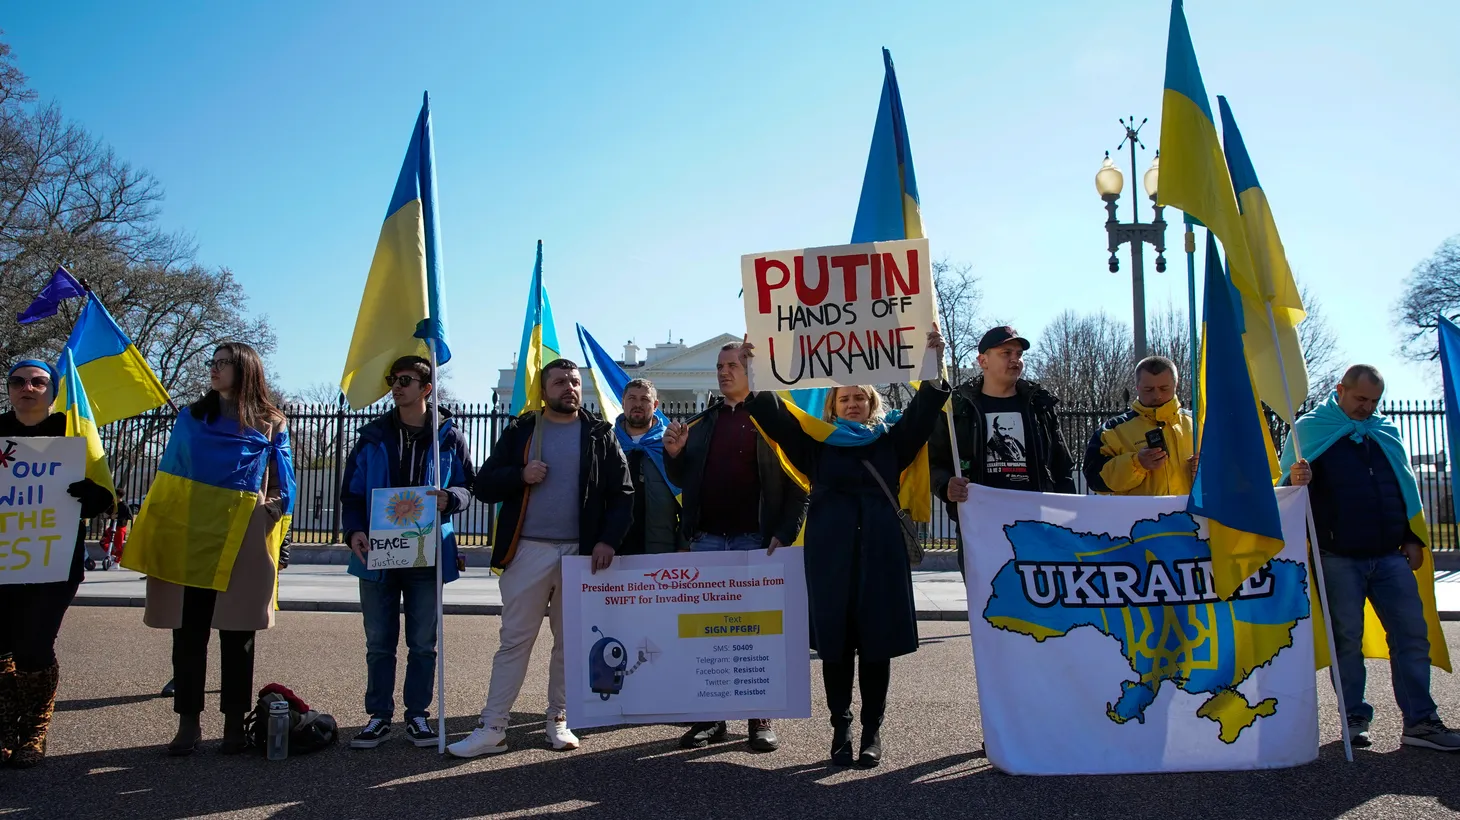 Demonstrators hold Ukrainian flags, signs, and banners during a "Stand with Ukraine" rally against the Russian invasion of Ukraine, in front of the White House in Washington, U.S., February 28, 2022.